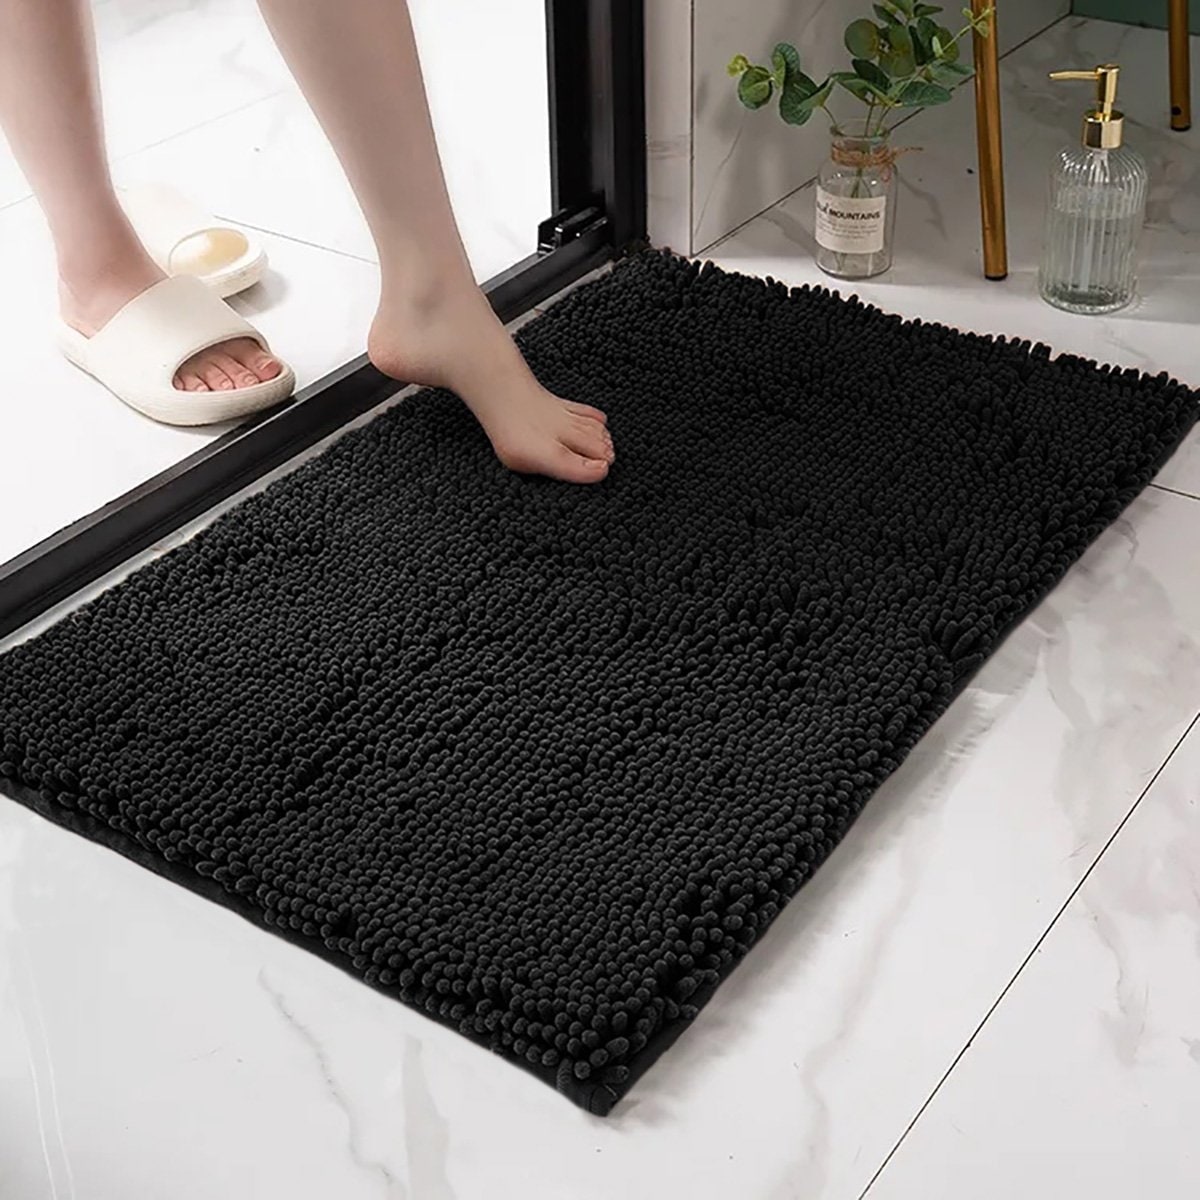 https://ak1.ostkcdn.com/images/products/is/images/direct/65384047090b7a87d1551a5ff33aa84a54505330/Soft-Cozy-Plush-Chenille-Bath-Mat-Highly-Absorbent-Shower-Mat-Non-Slip-Bathroom-Rug.jpg